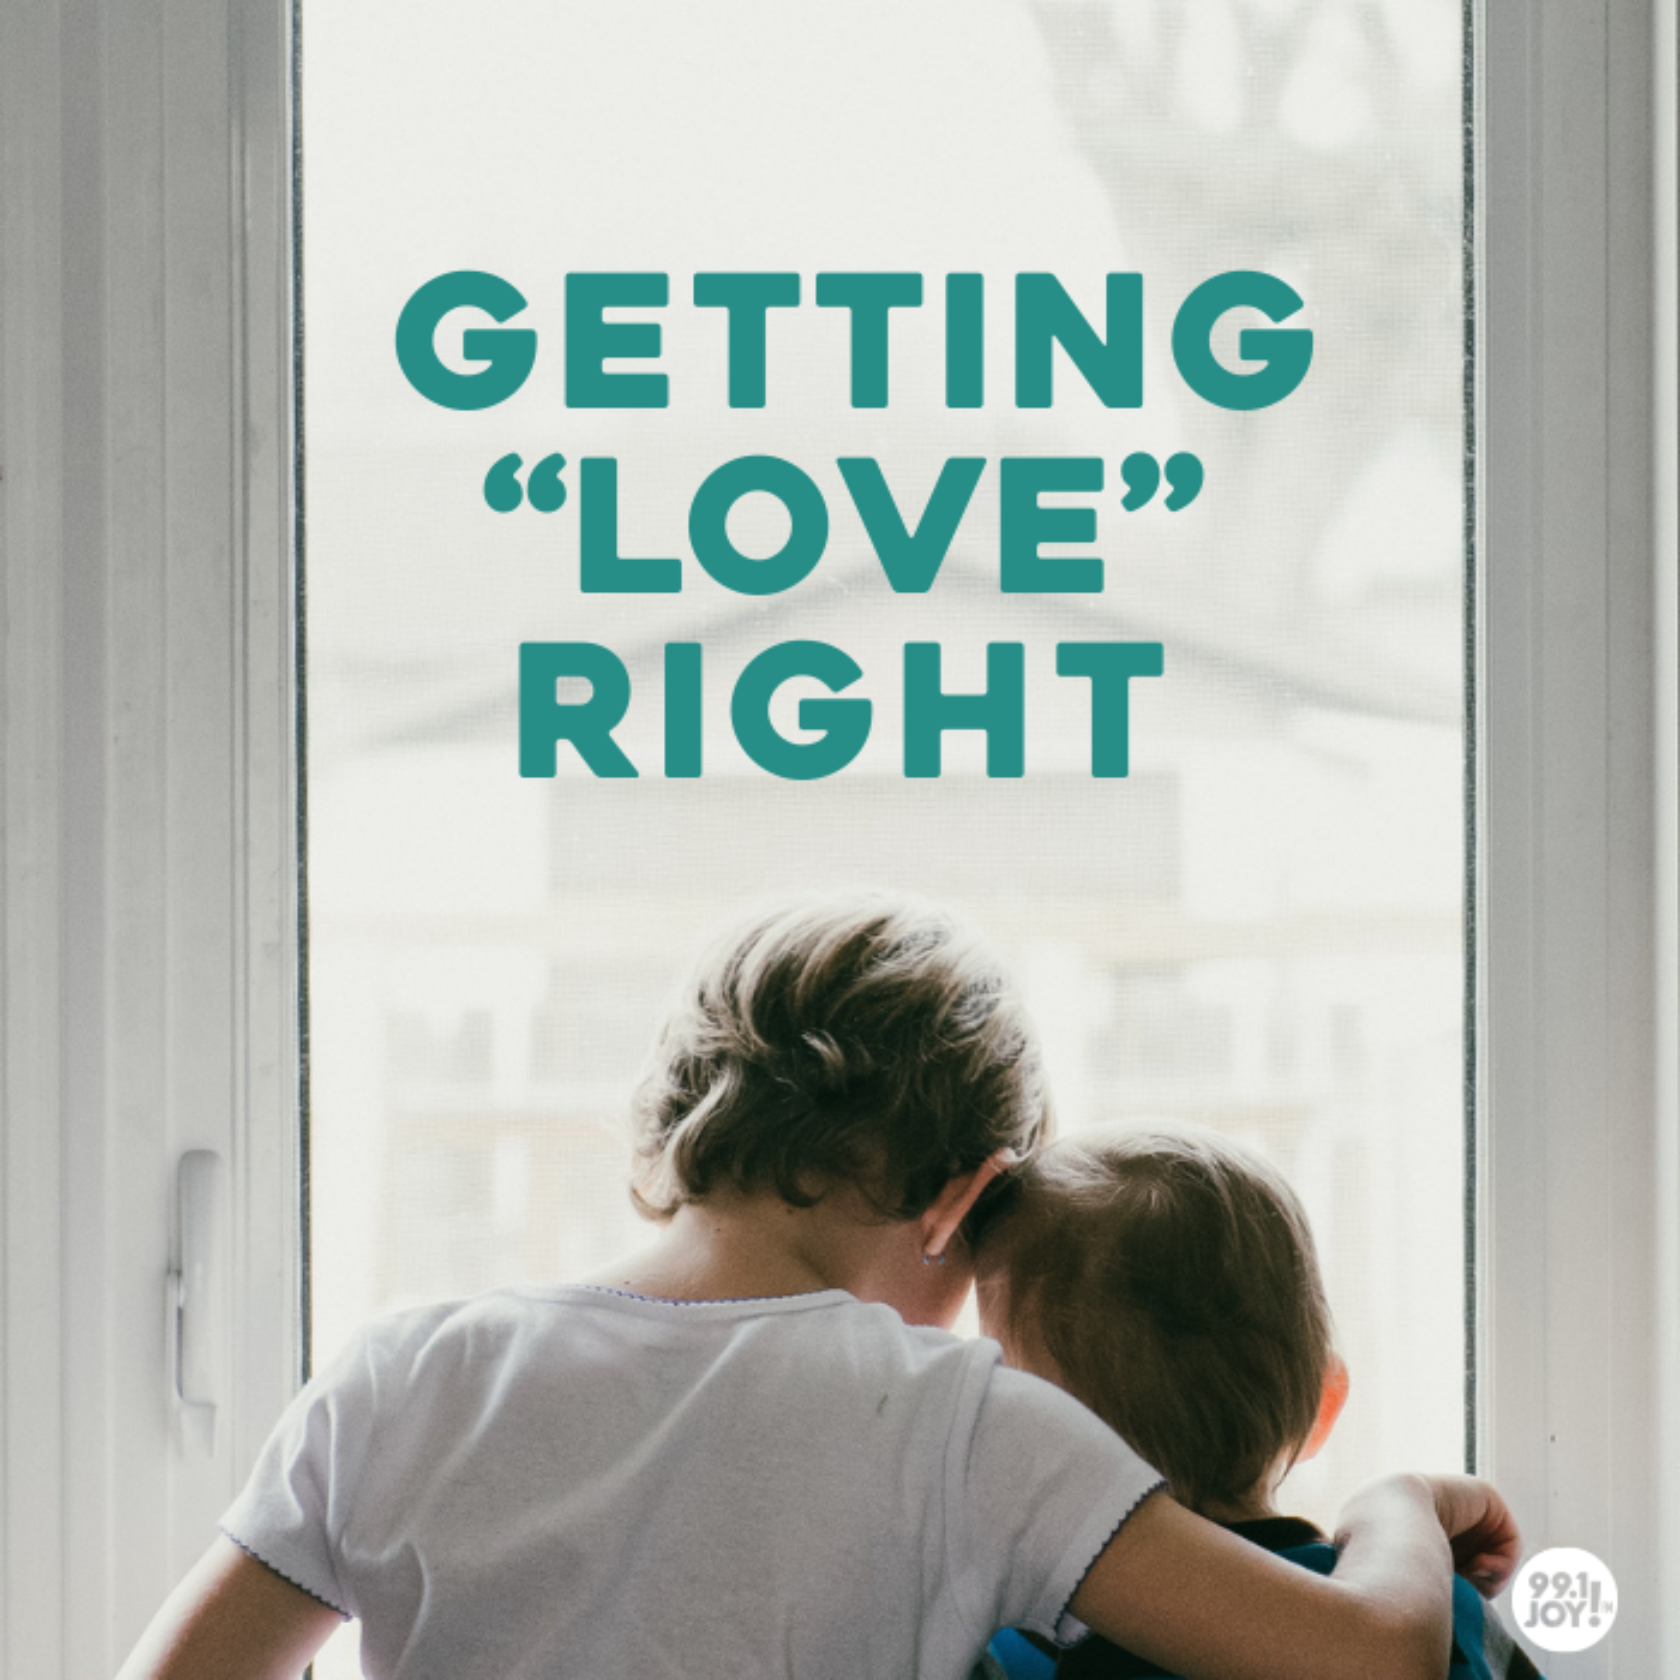 Getting “Love” Right